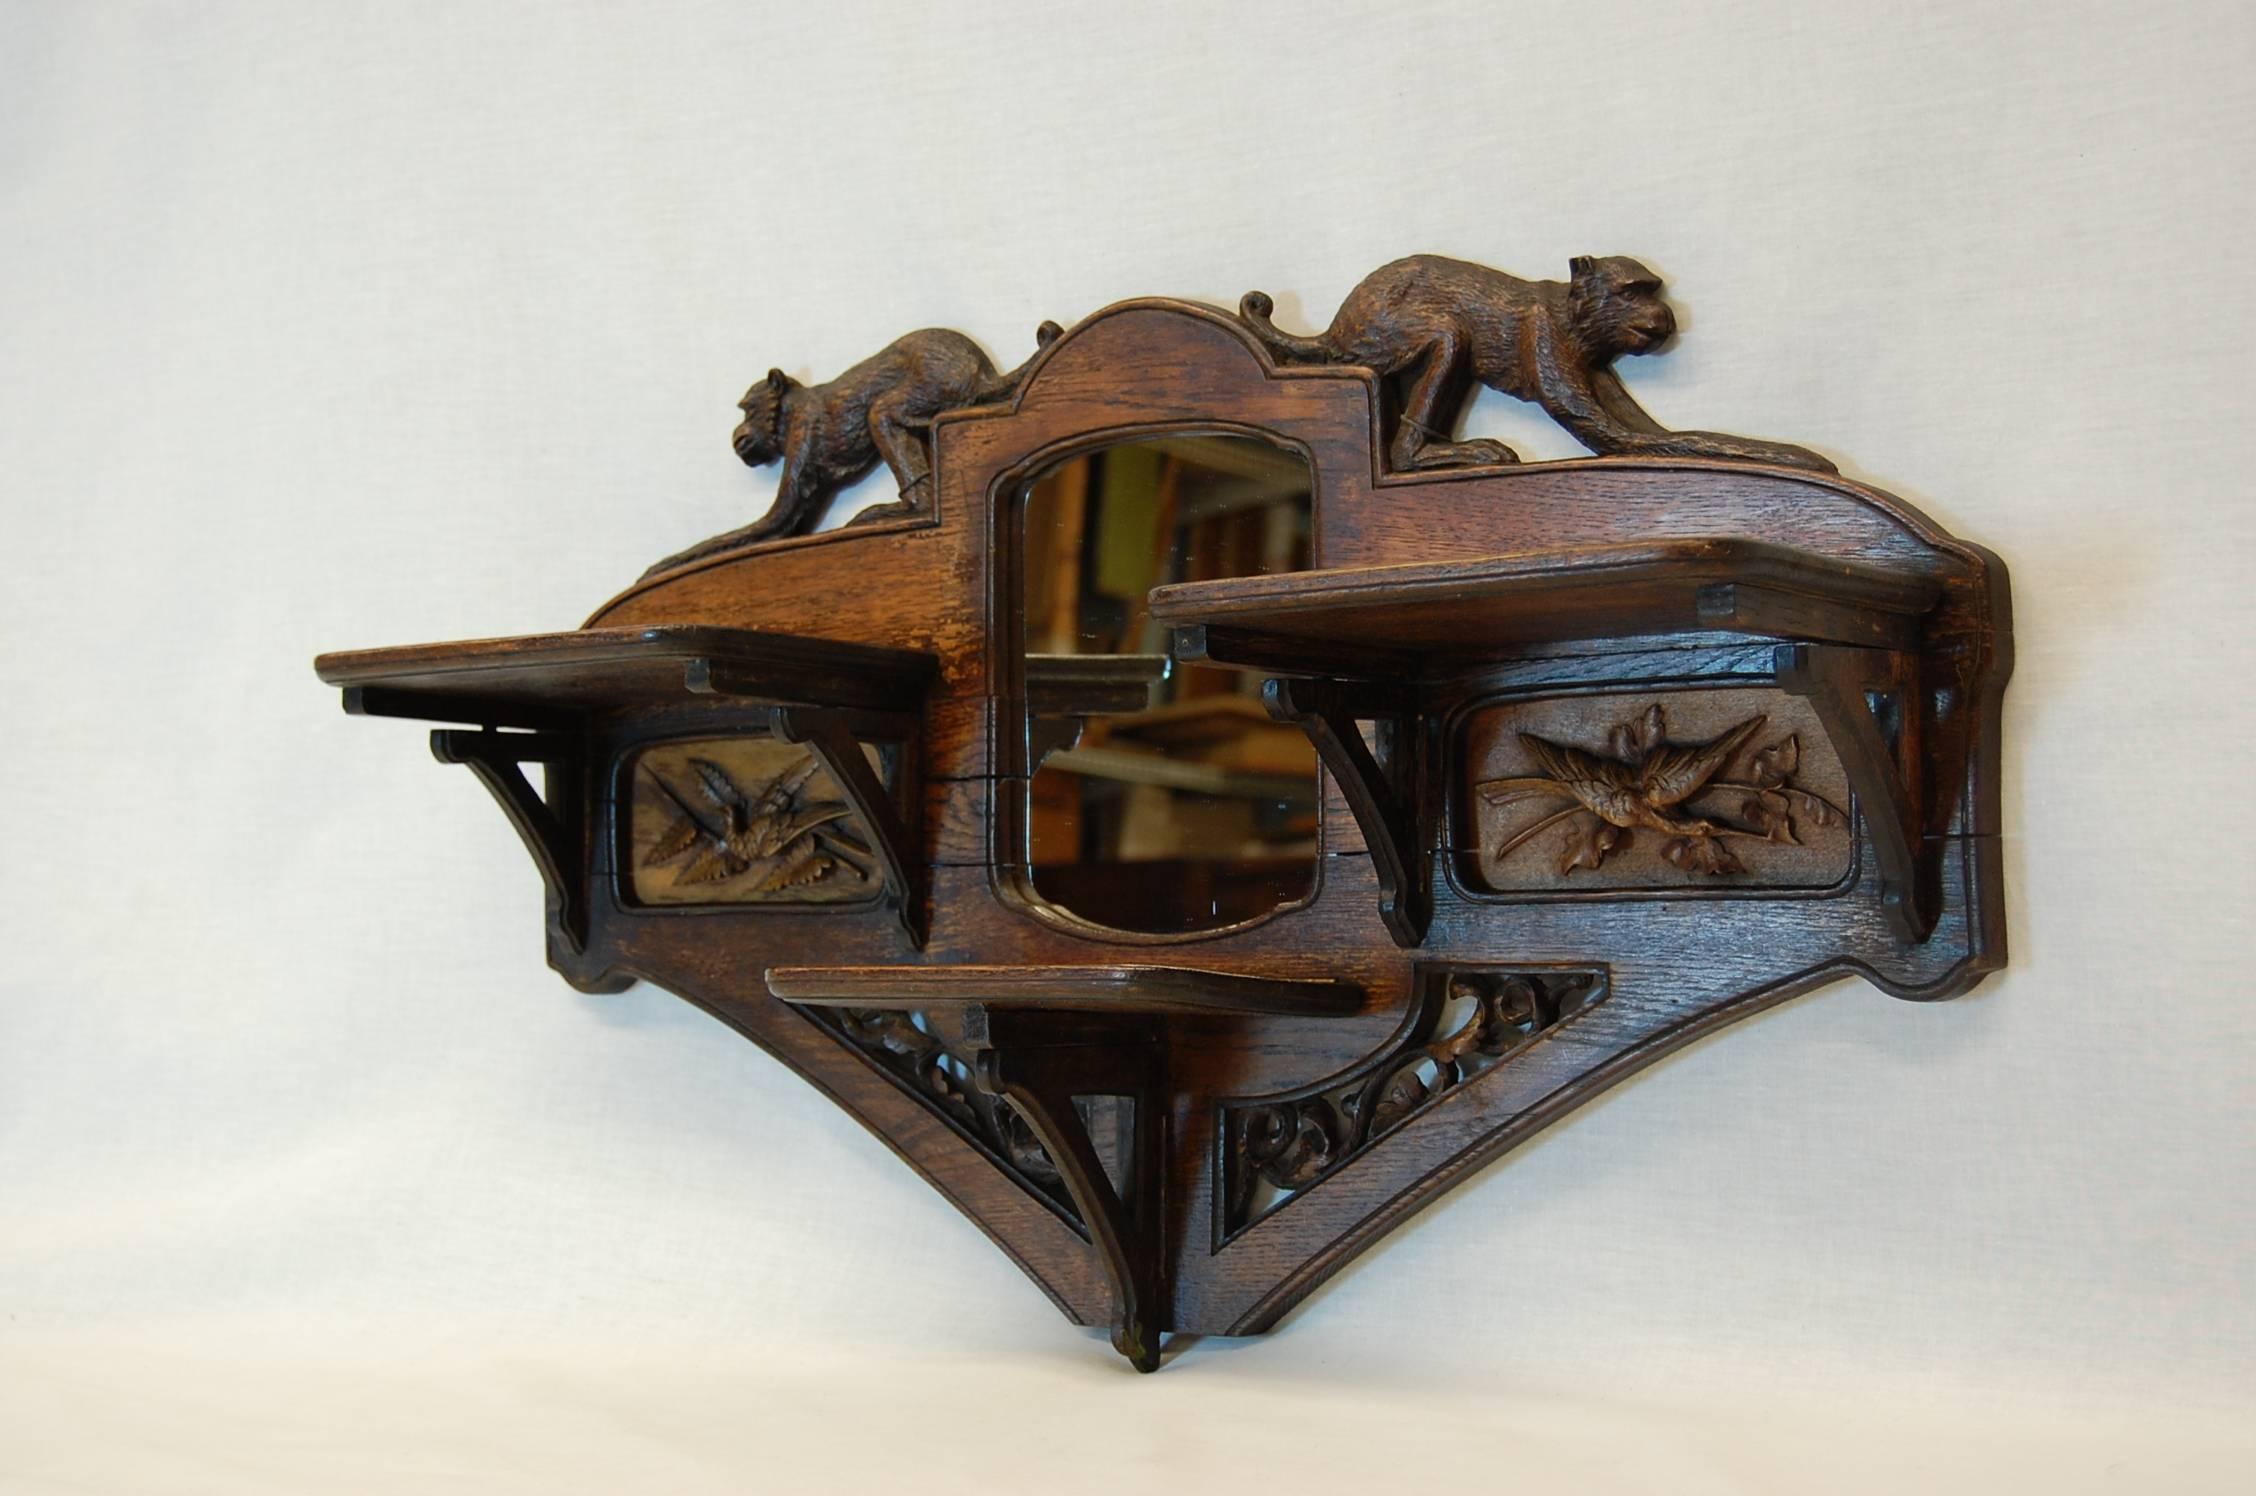 German Carved Oakwood Wall-Mounted Shaving Mirror with Flip-Up Shelves, circa 1890